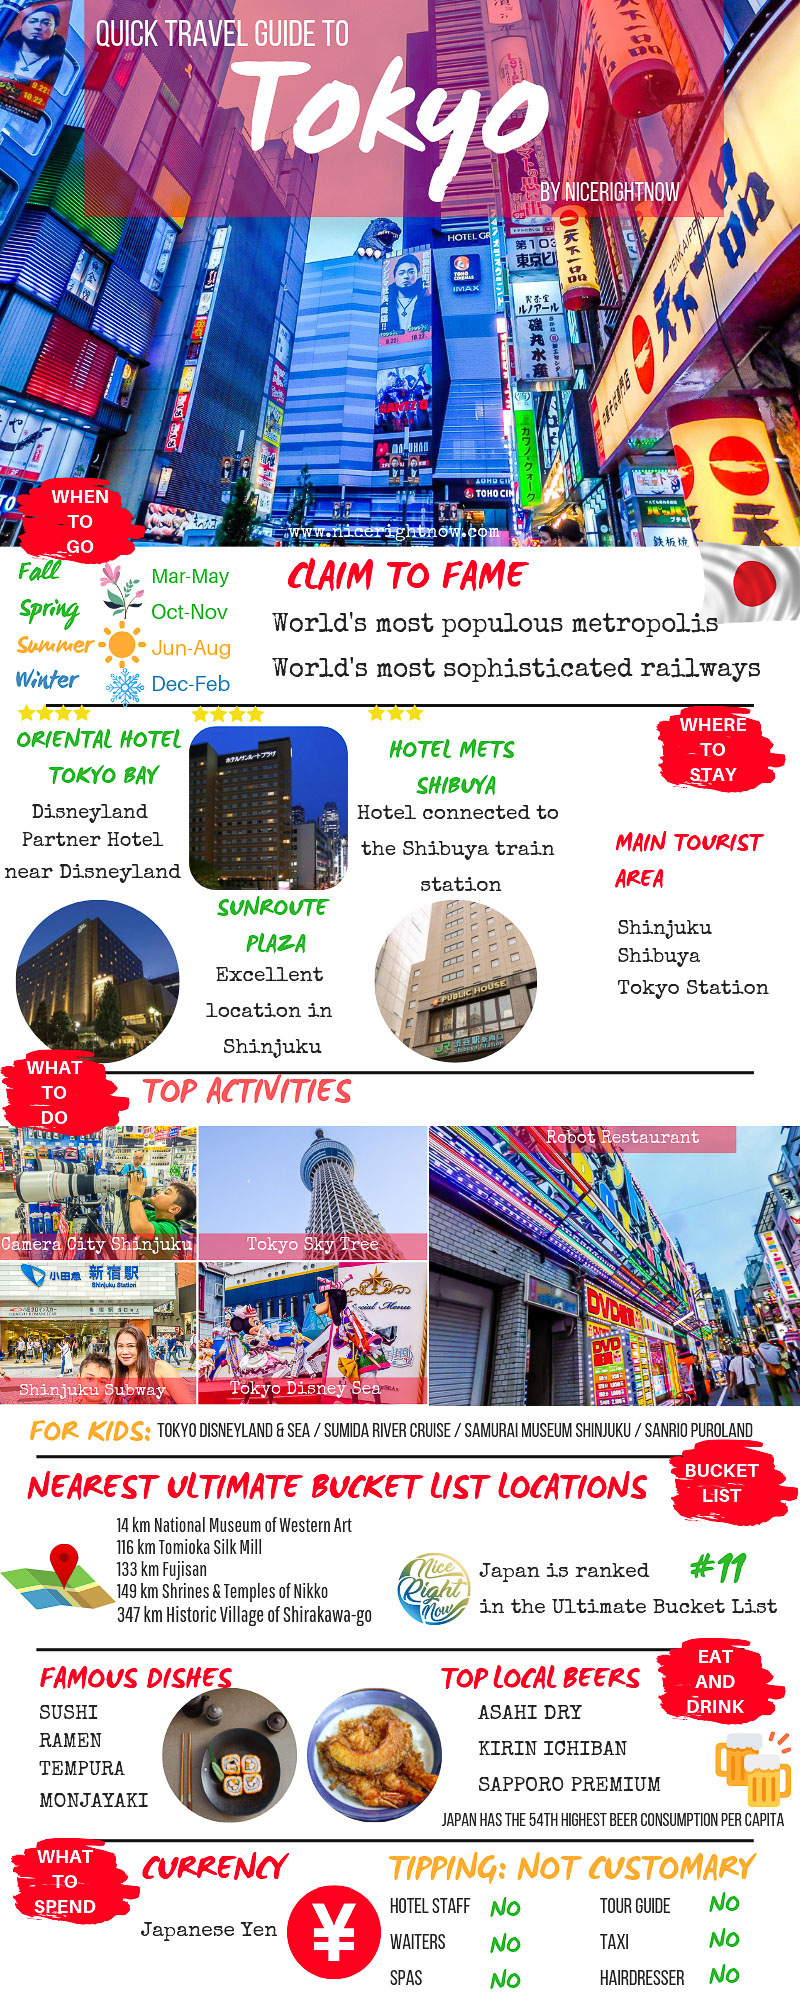 P907 Travel Guide to Tokyo infographic